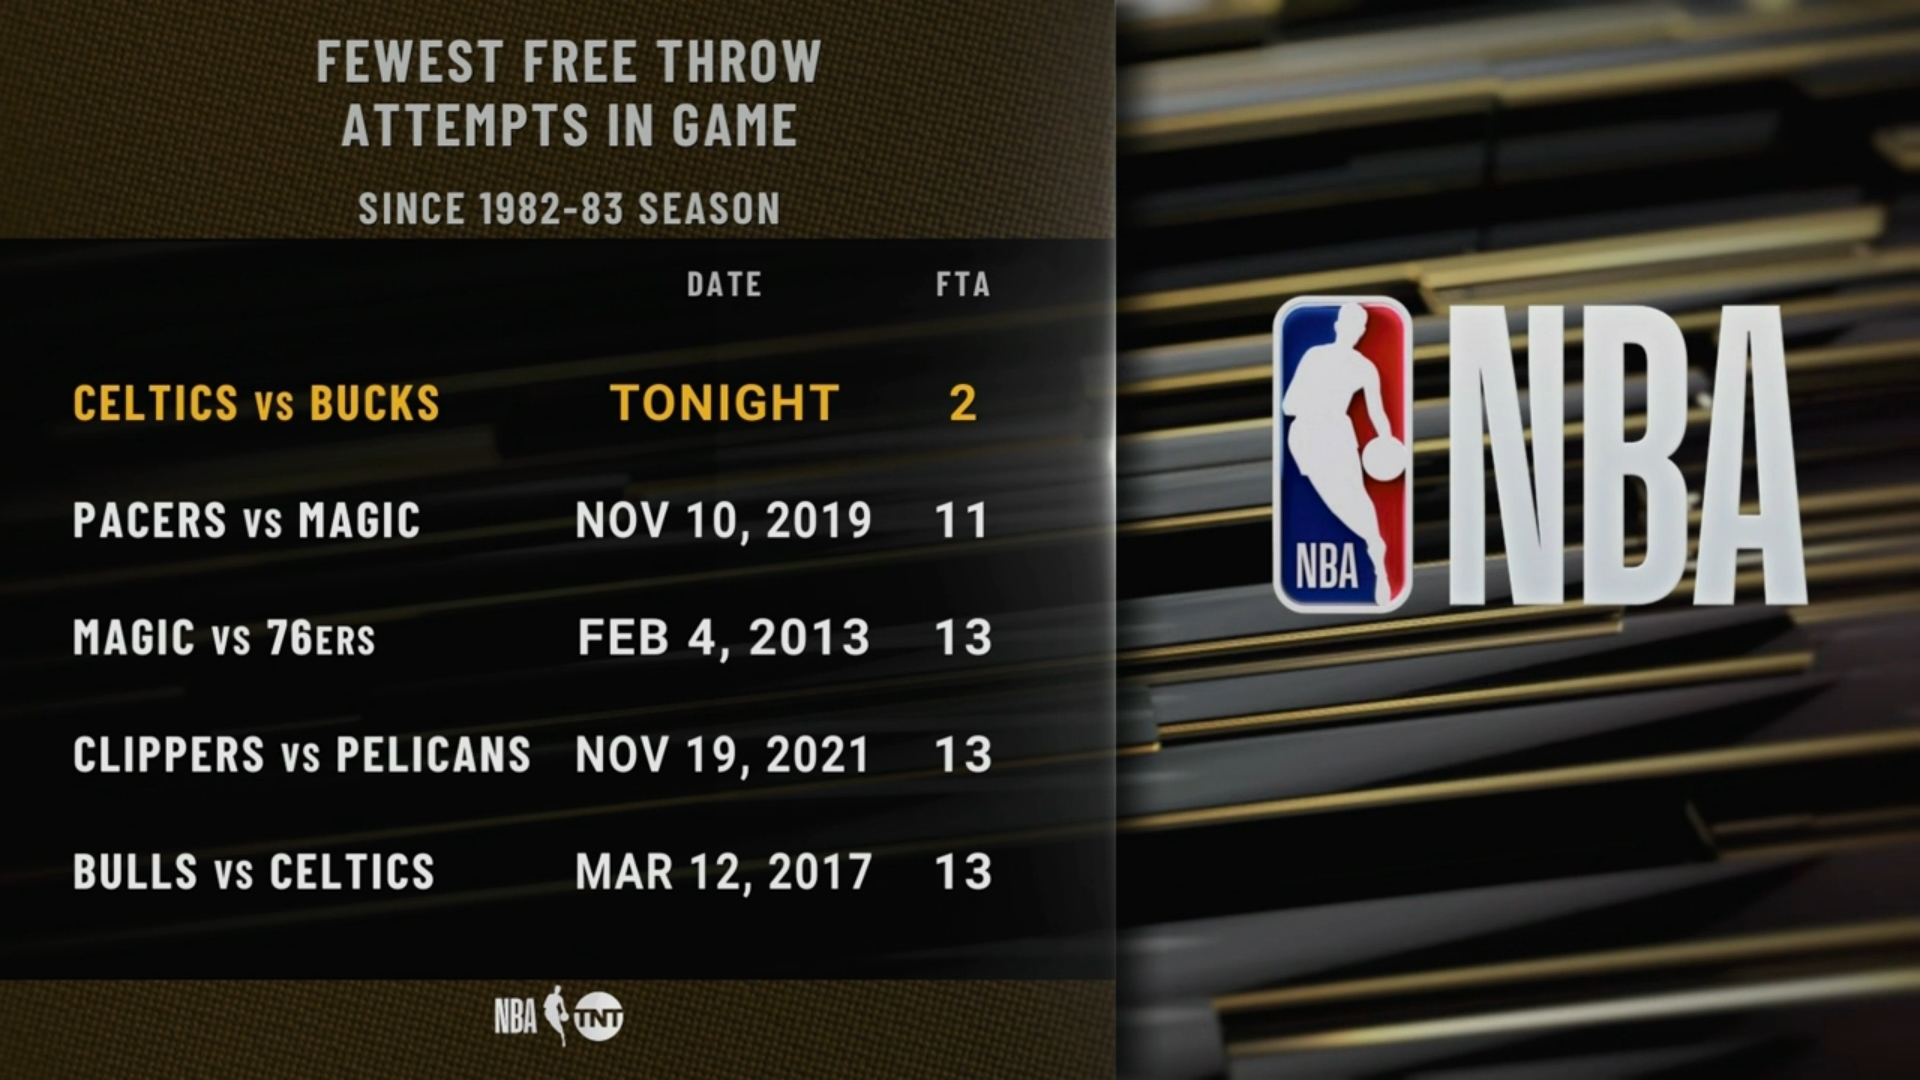 The Celtics Are The First Team In NBA History To Go 0-For-0 On Free Throws In A Game